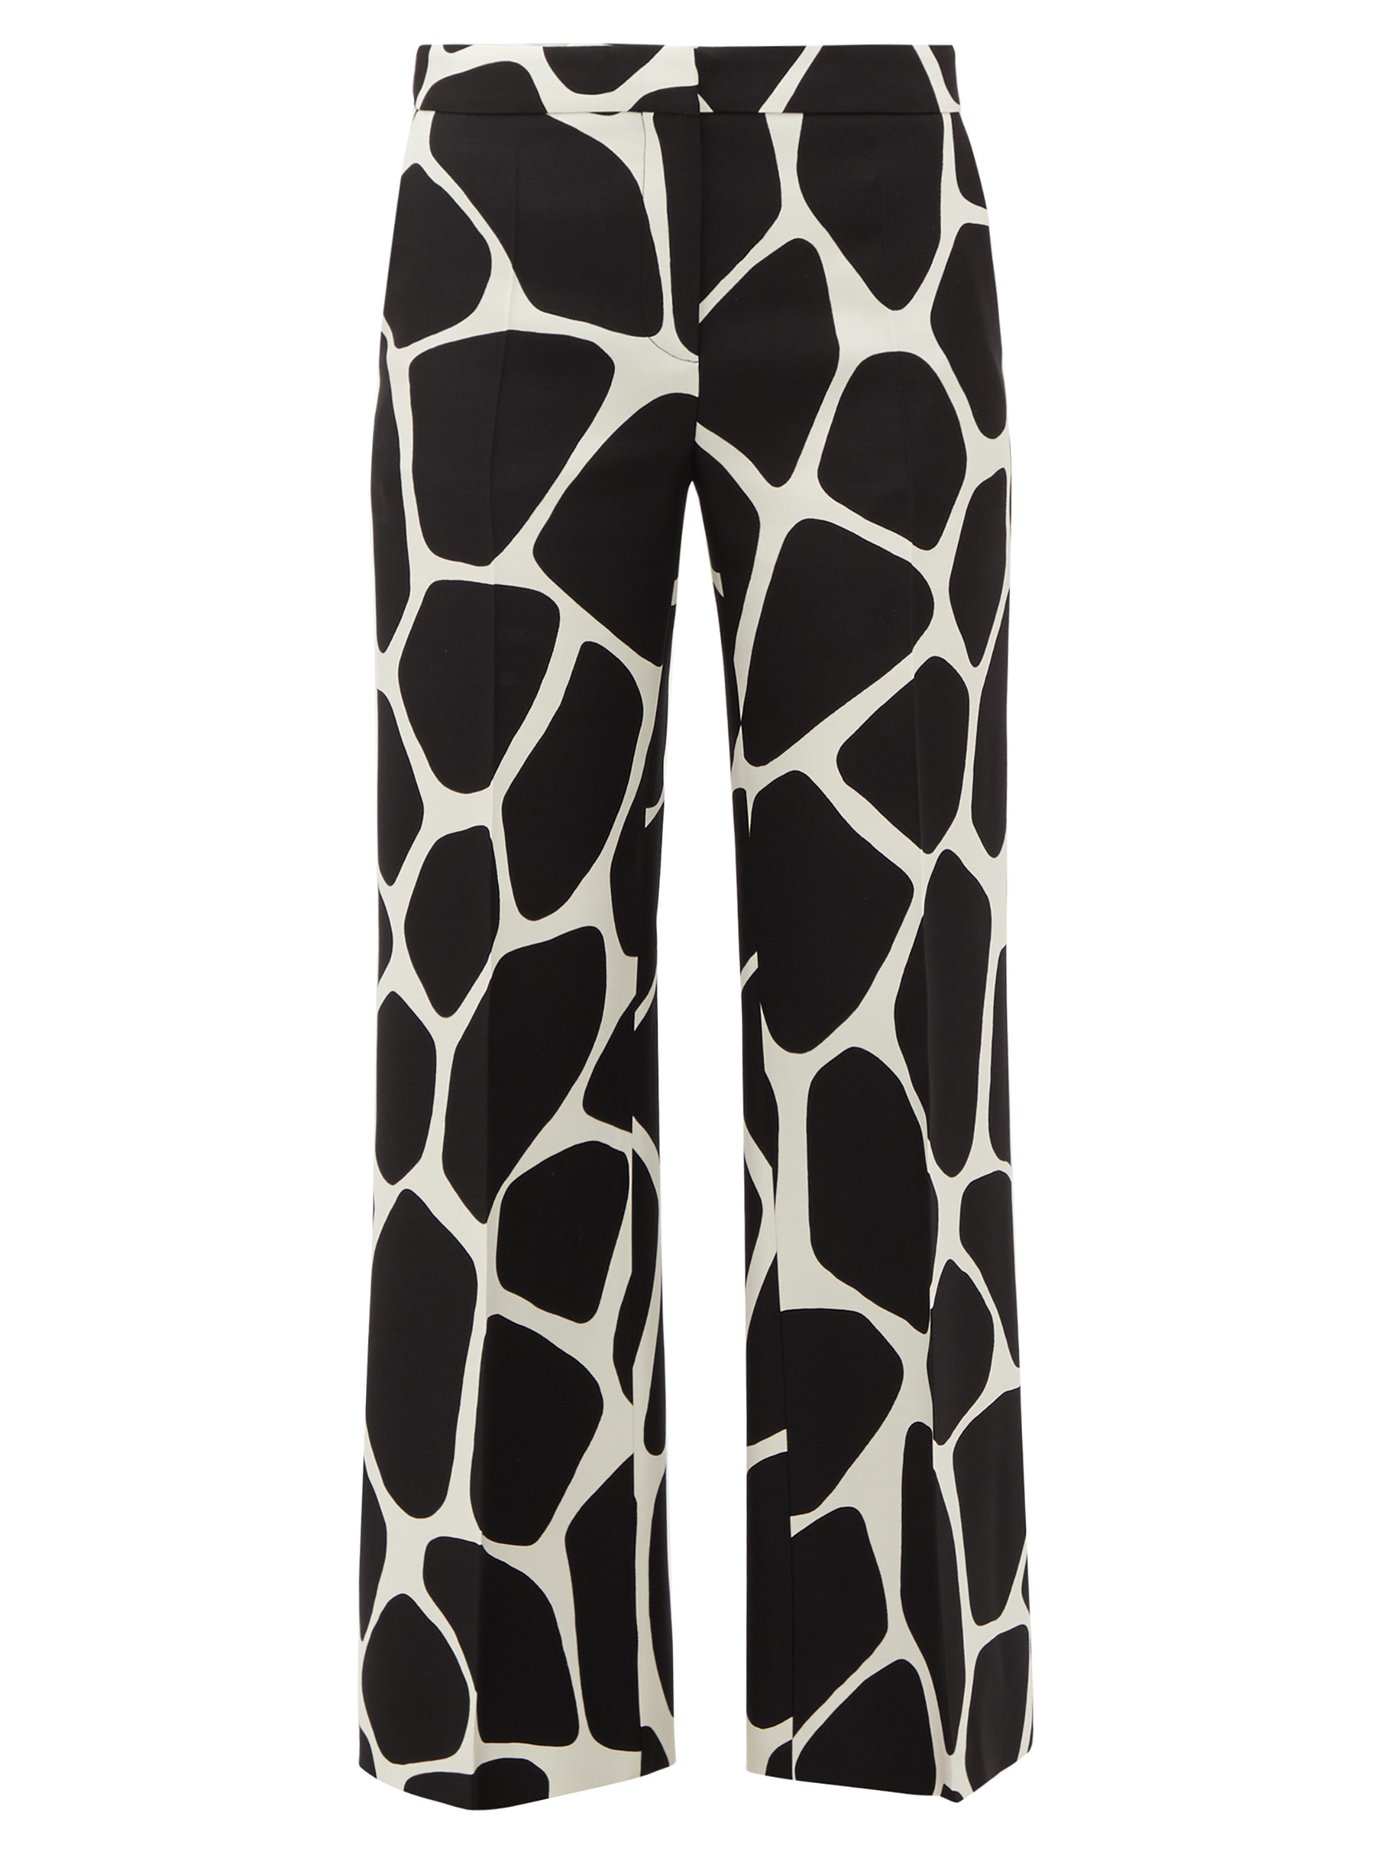 1966 giraffe-print wool-blend trousers by VALENTINO, available on matchesfashion.com for $1100 Heidi Klum Pants Exact Product 